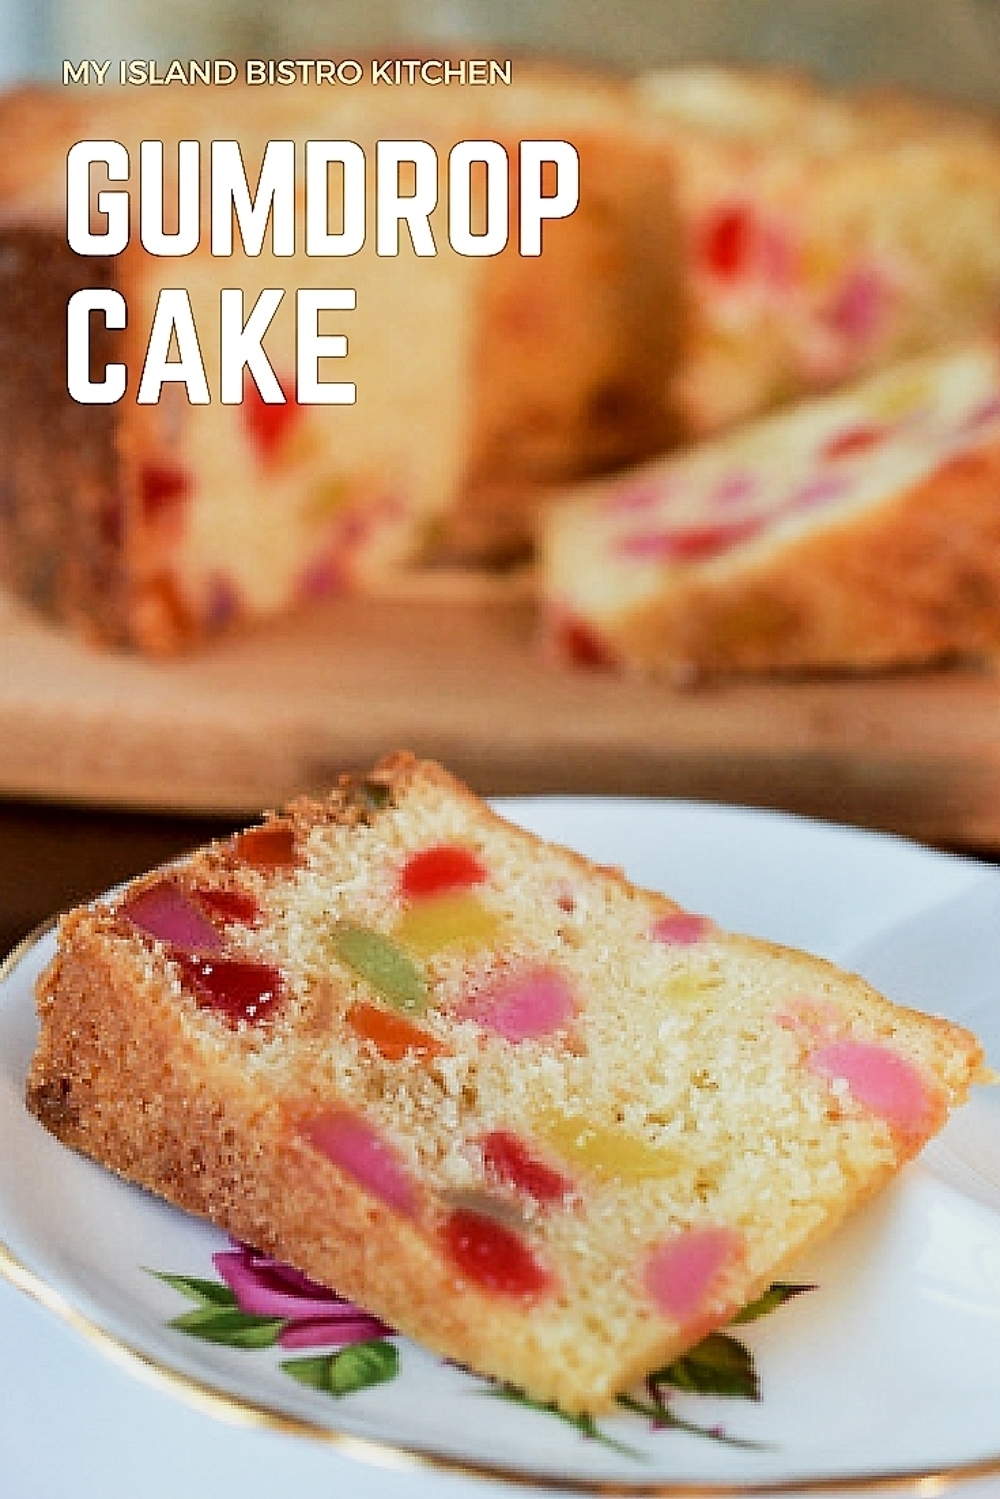 This gumdrop cake is loaded with flavour and dotted with colorful gumdrops.